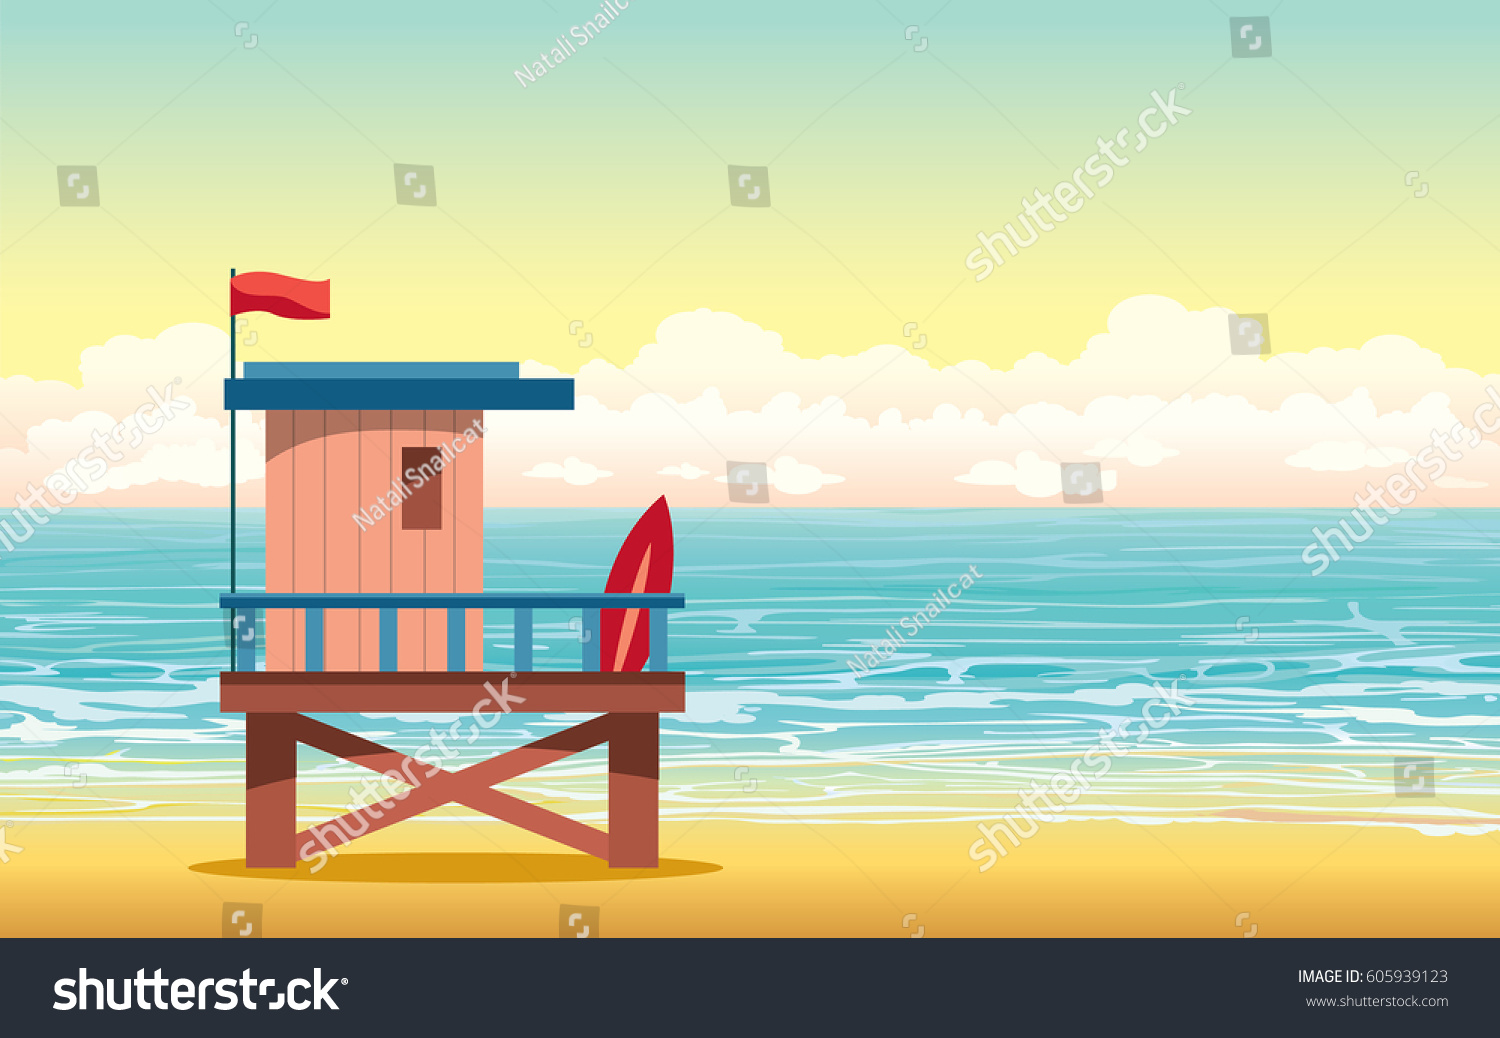 SVG of Cartoon lifeguard house on cloudy sunset sky and blue sea in background. Summer vector illustration.  svg